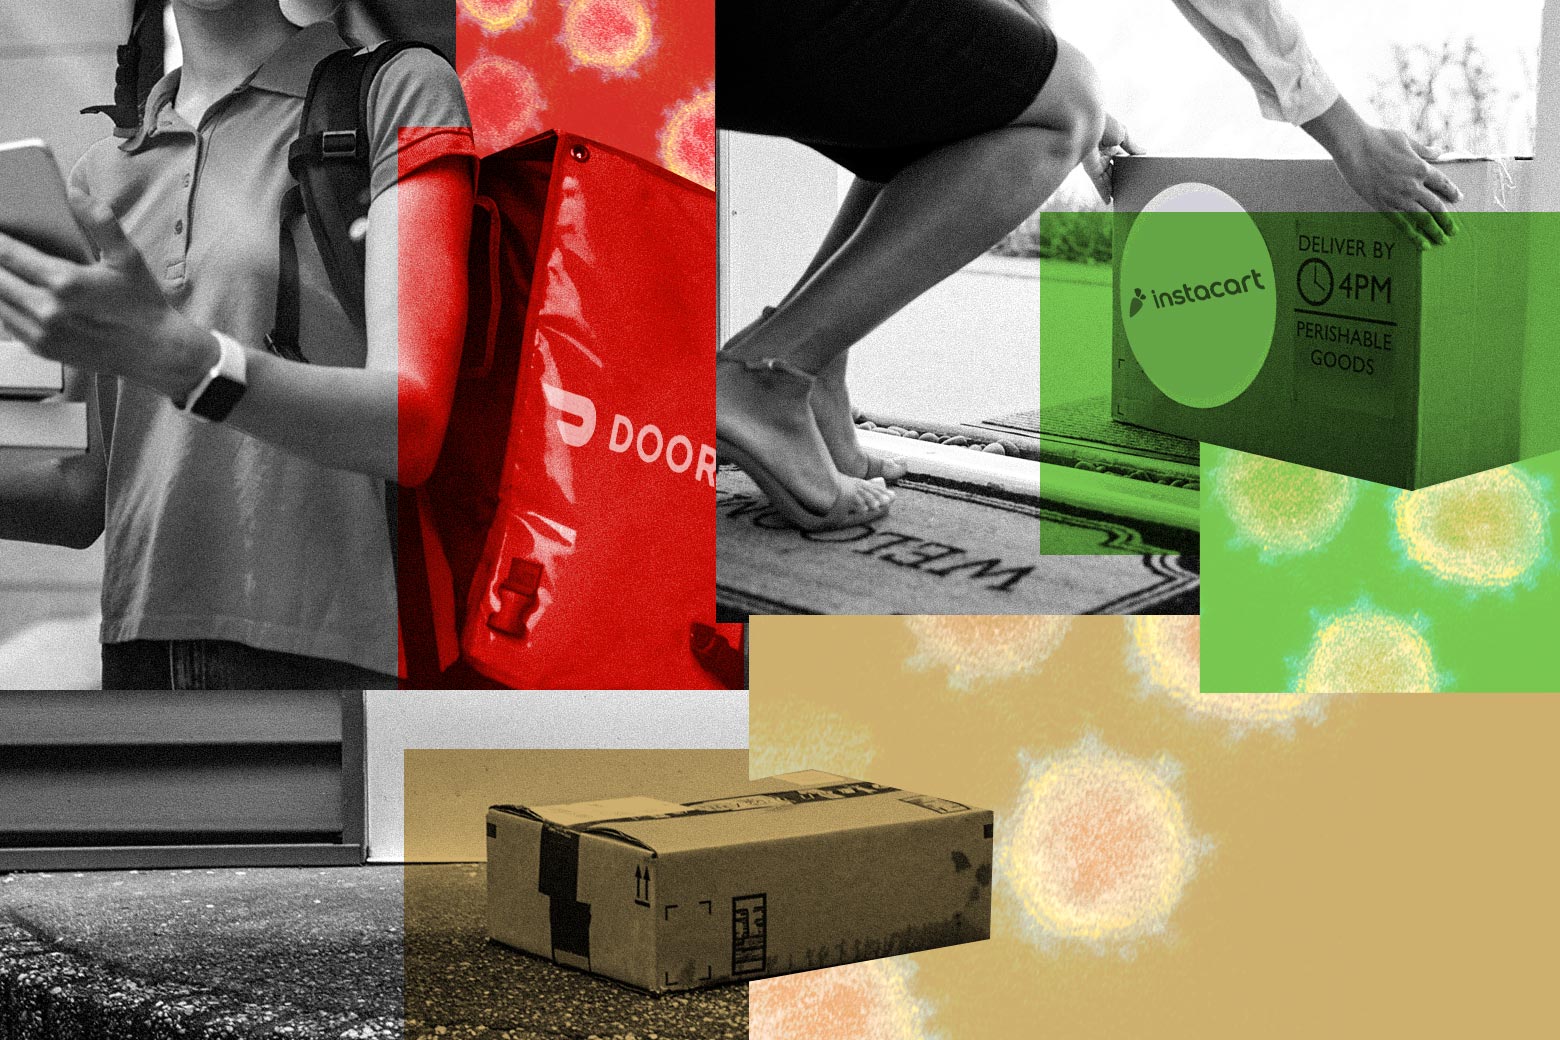 A collage of photos of a DoorDash delivery worker wearing a package and looking at their phone, a person picking up an Instacart package from their front porch, an Amazon package placed on a rug, and some virus cells.